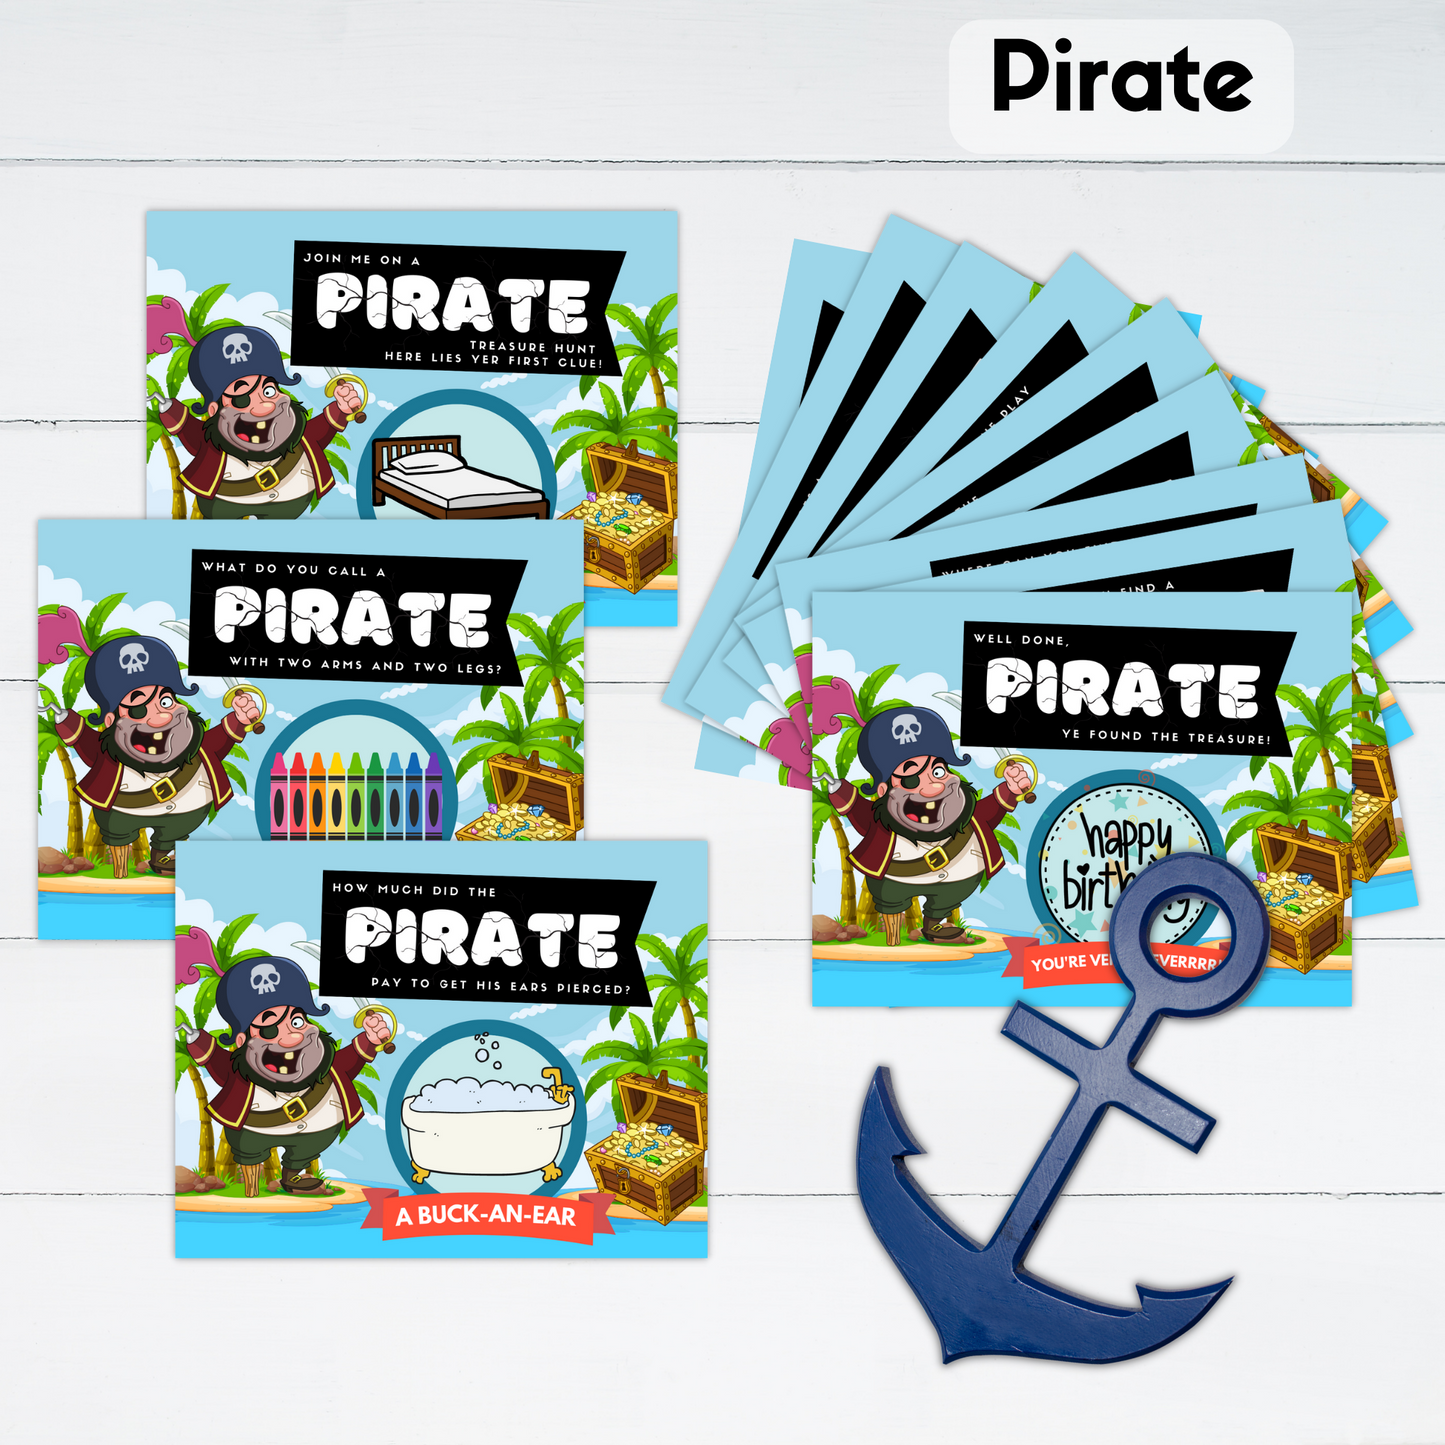 The cards for a pirate themed treasure hunt are displayed with an anchor.